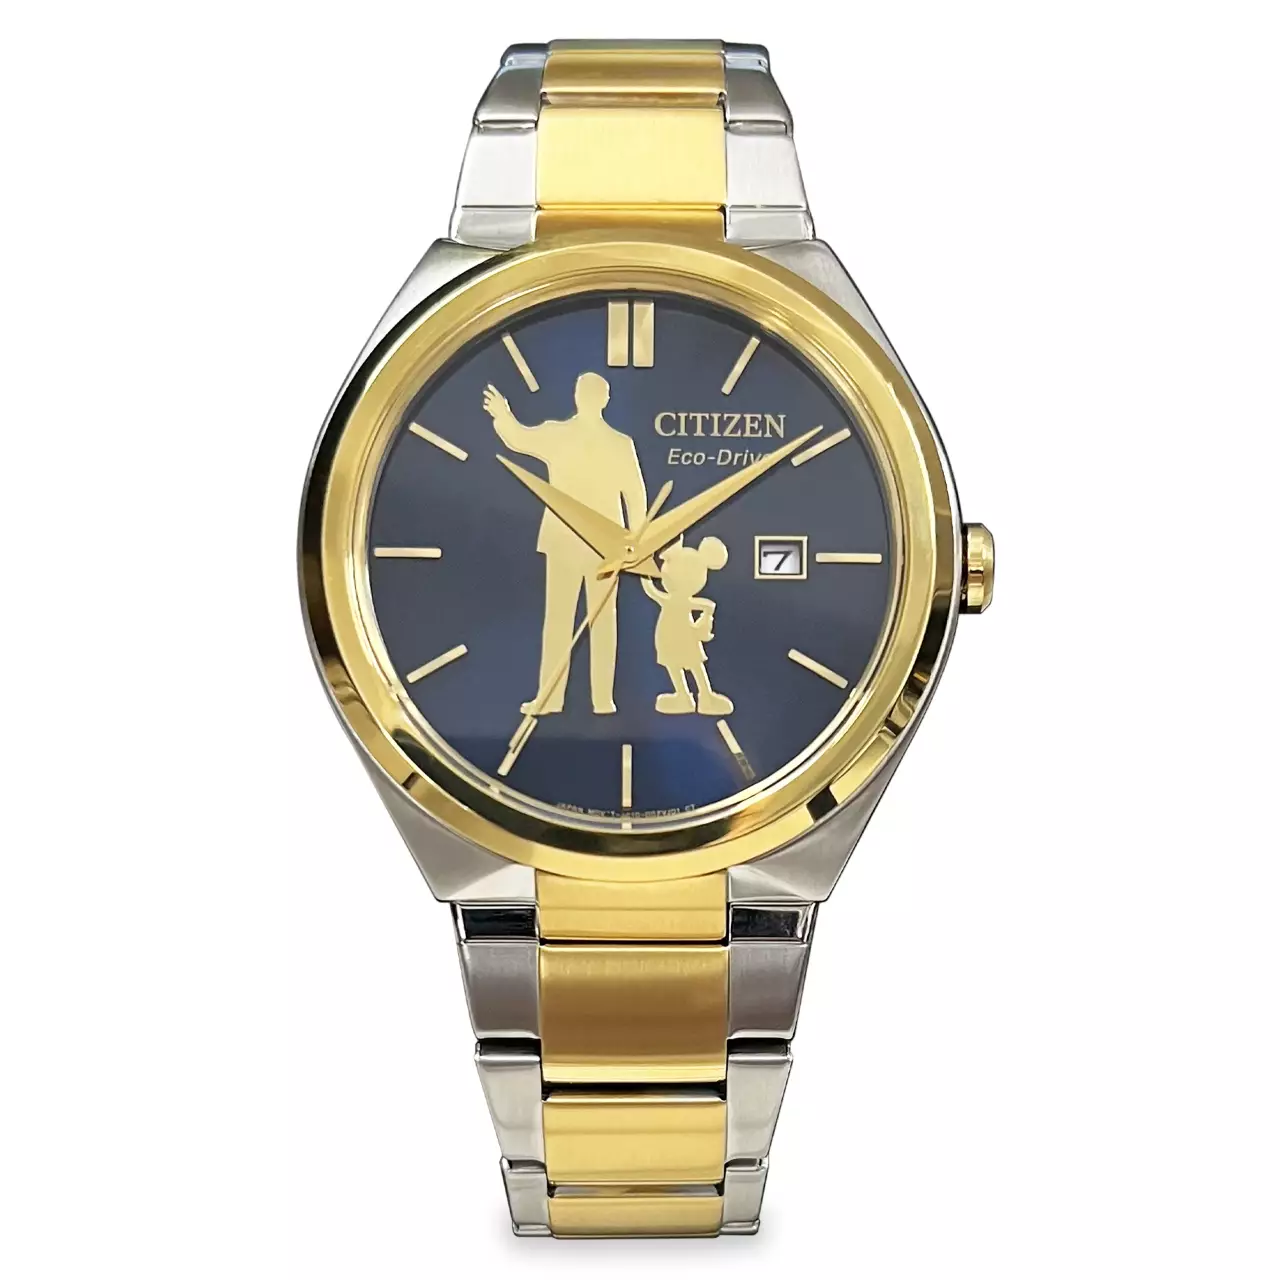 Walt Disney and Mickey Mouse ”Partners” Statue Watch by Citizen